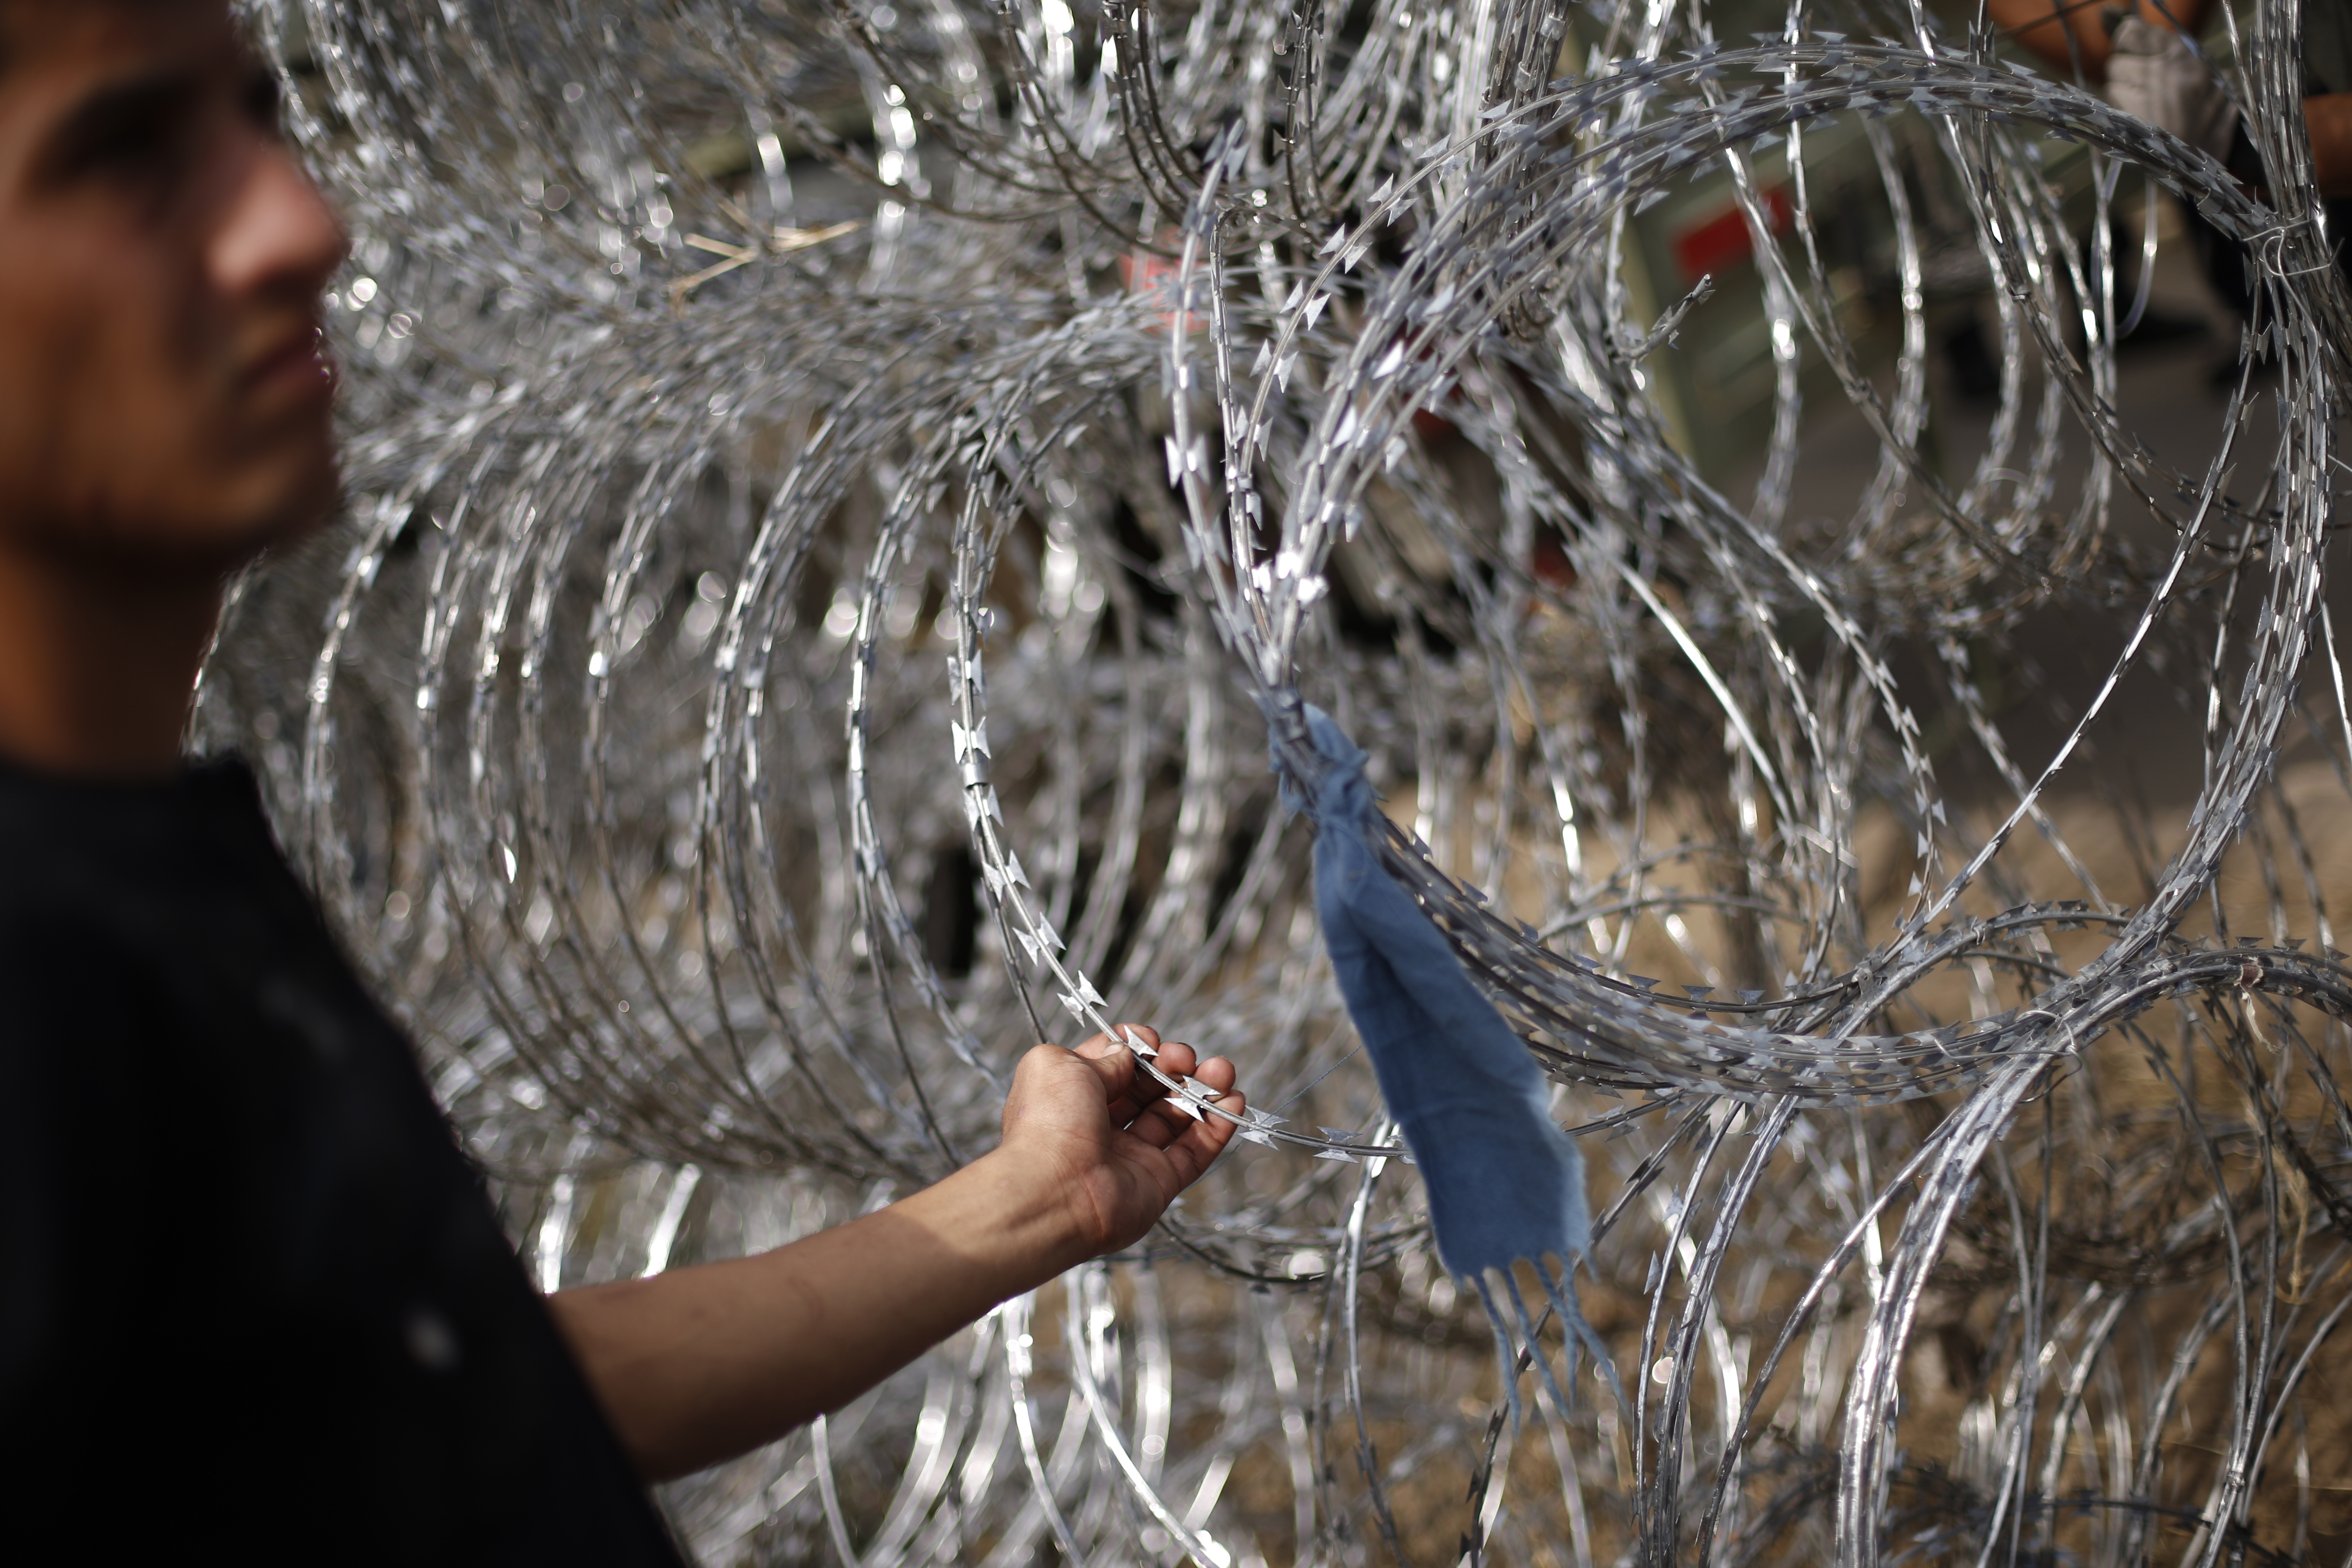 A migrant touches a razor wire fence at the border with Hungary near the village of Horgos, Serbia.